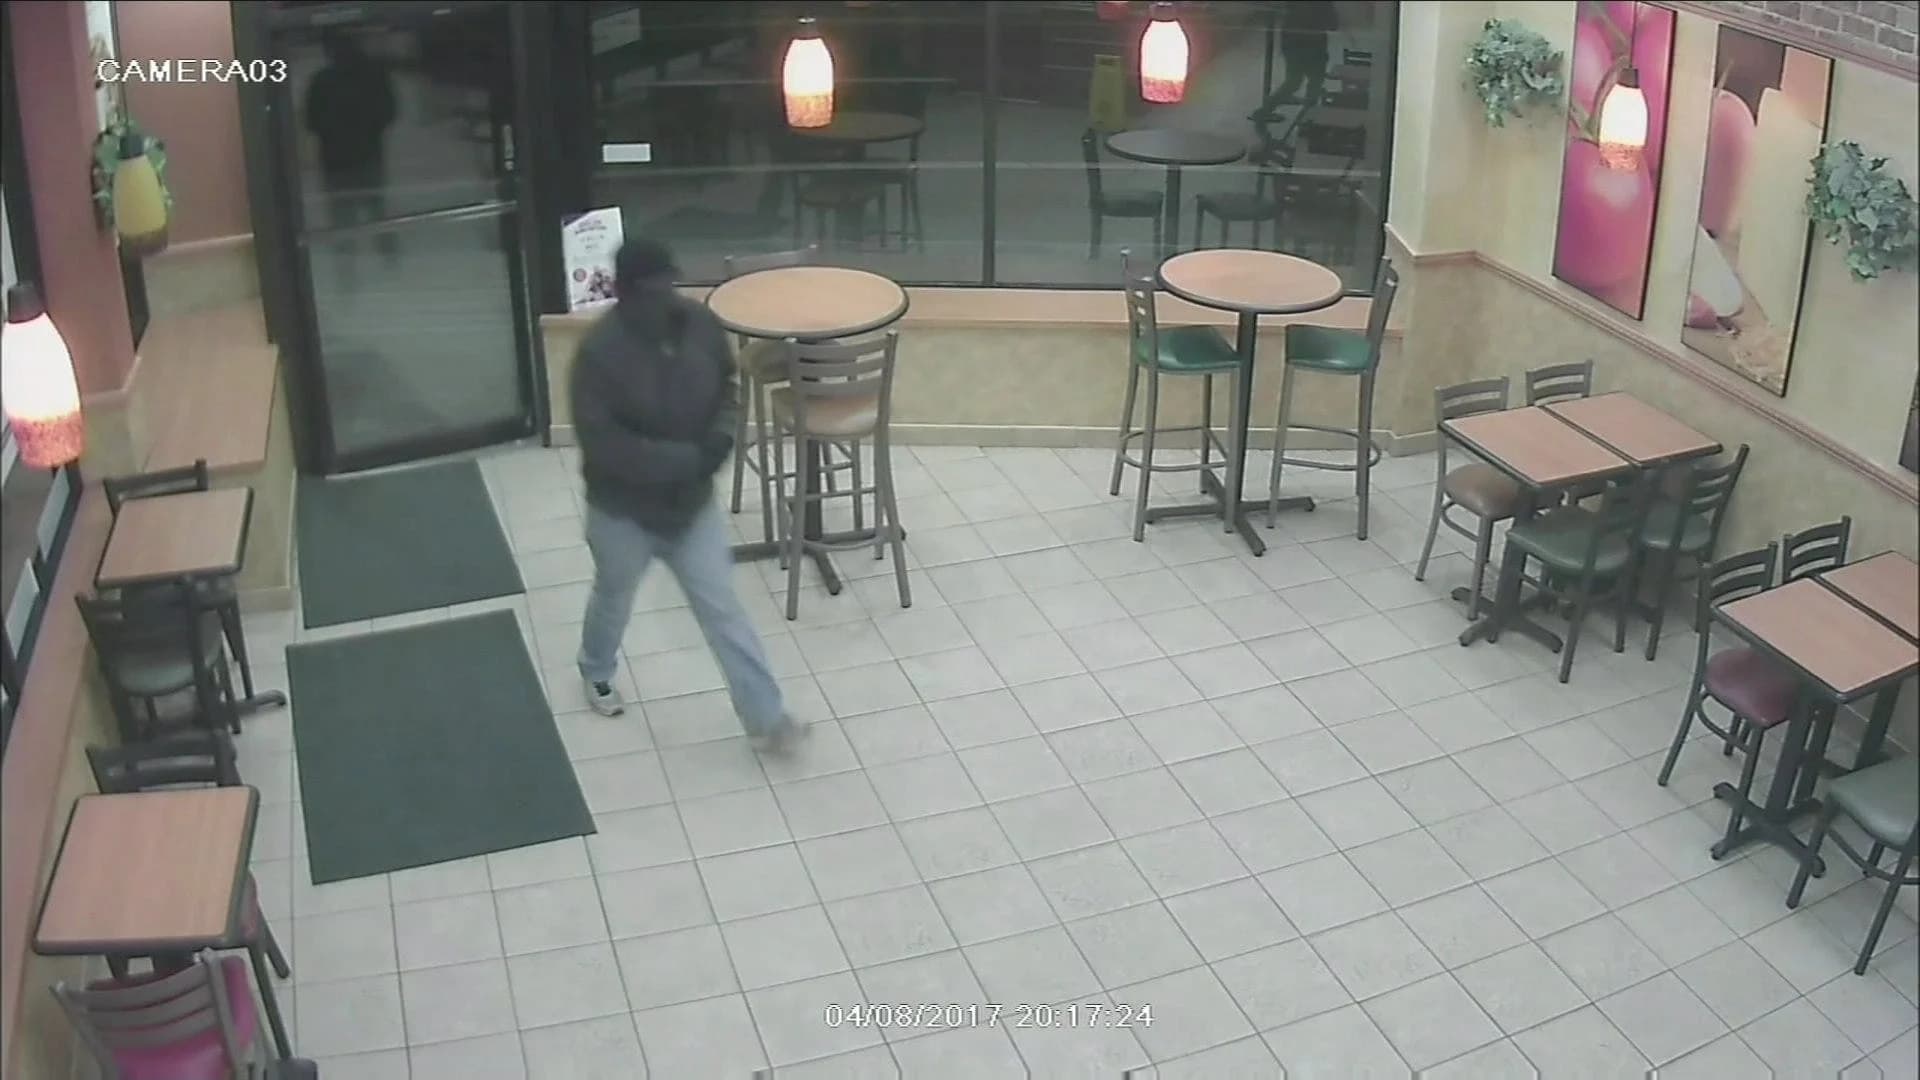 Police: Serial knifepoint robber strikes again at Subway, TCBY